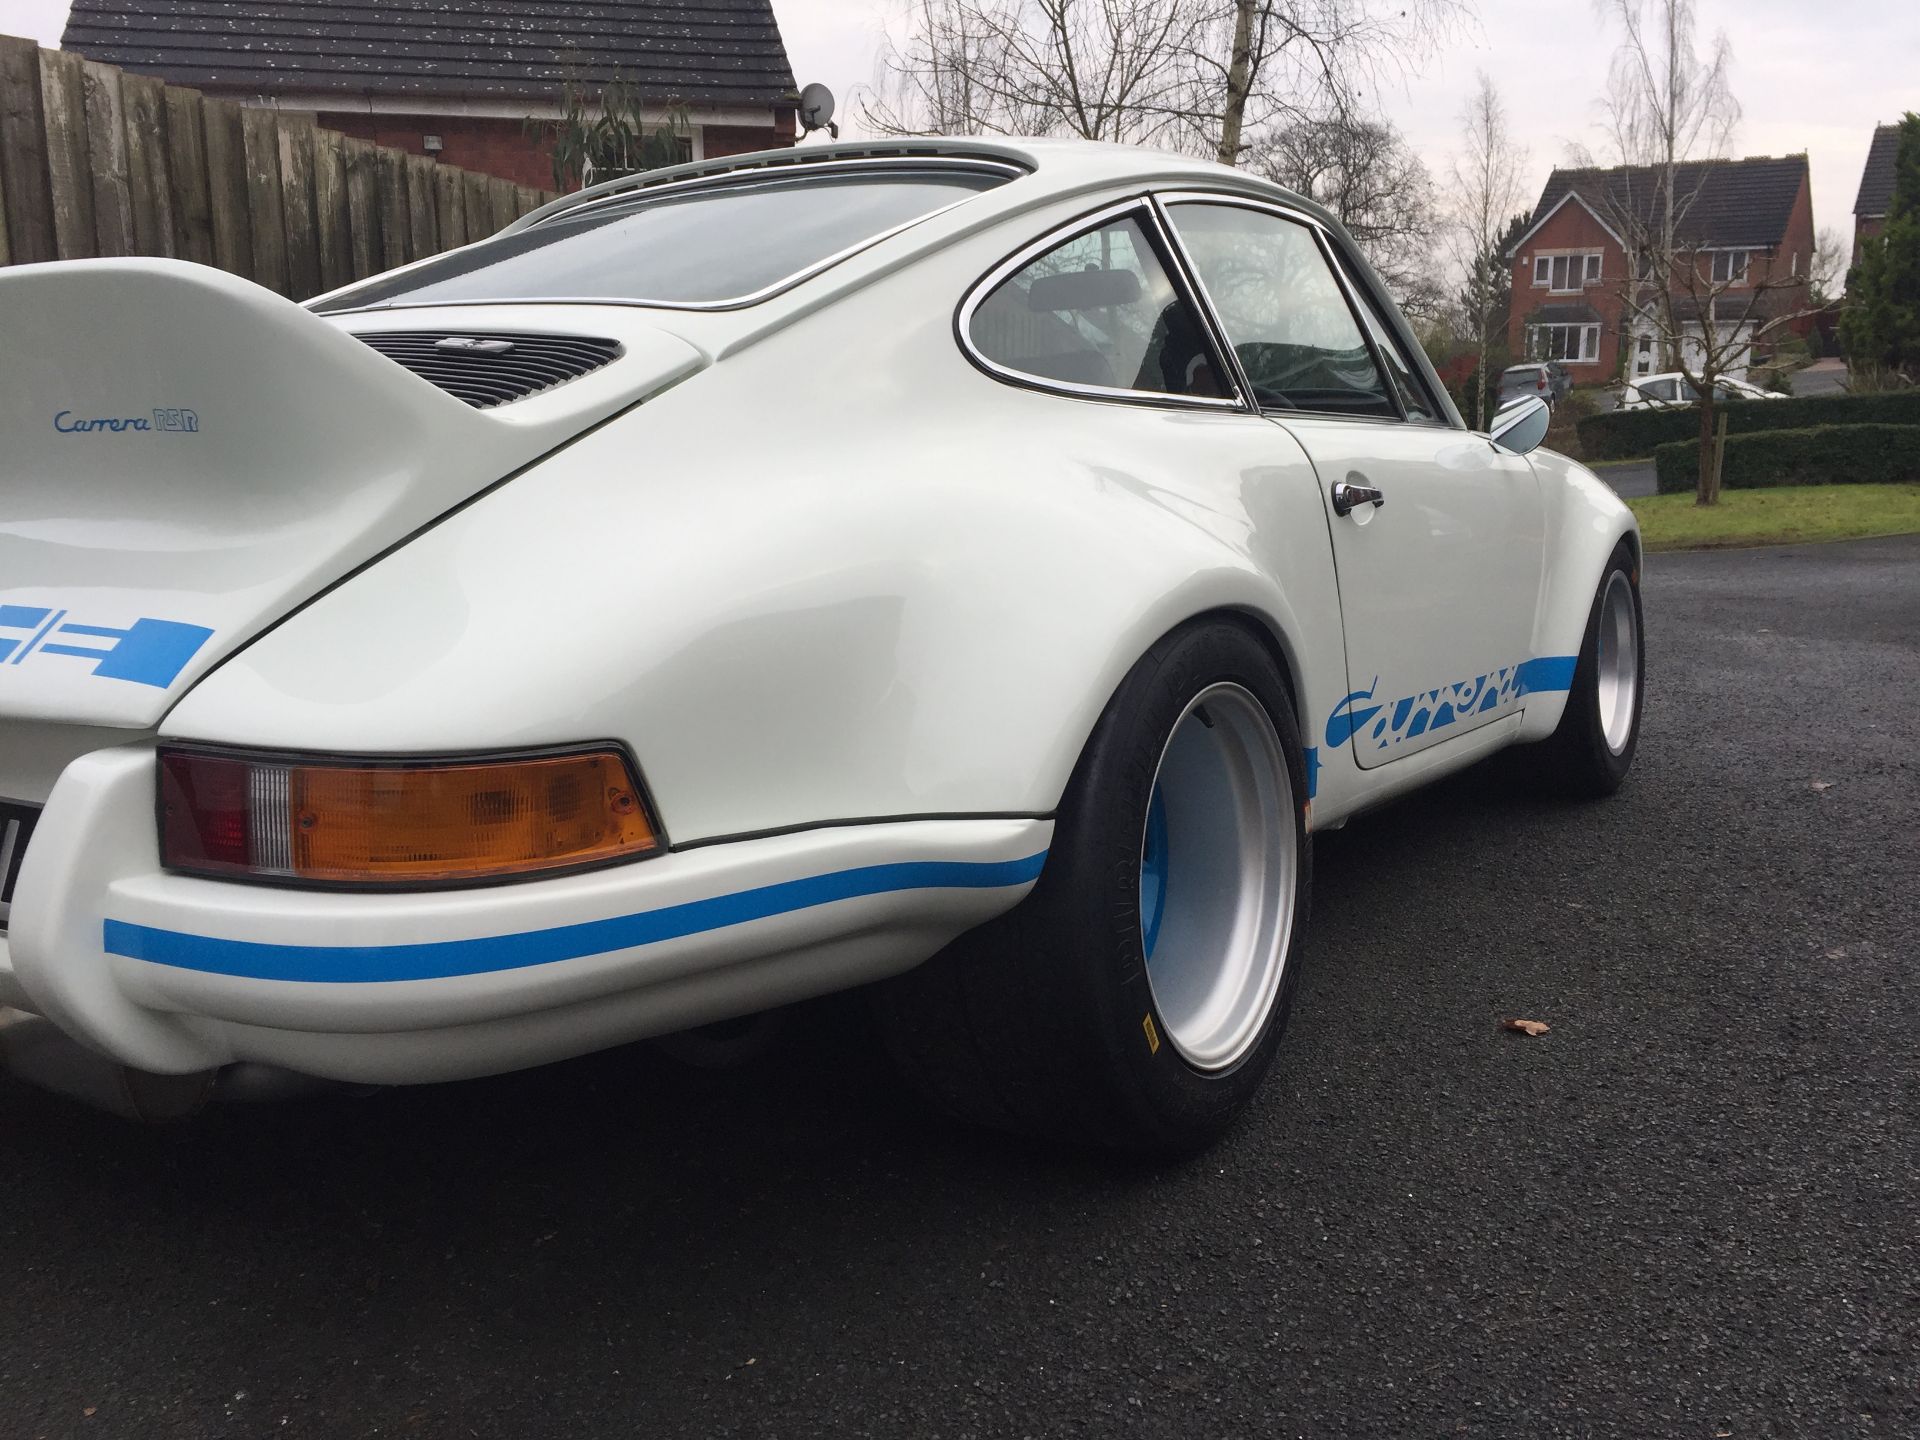 Porsche 911 Carrera 2.7 Rs Recreation - Pro 9 Build Based On A 1986 Porsche 911 **Reserve reduced** - Image 19 of 21